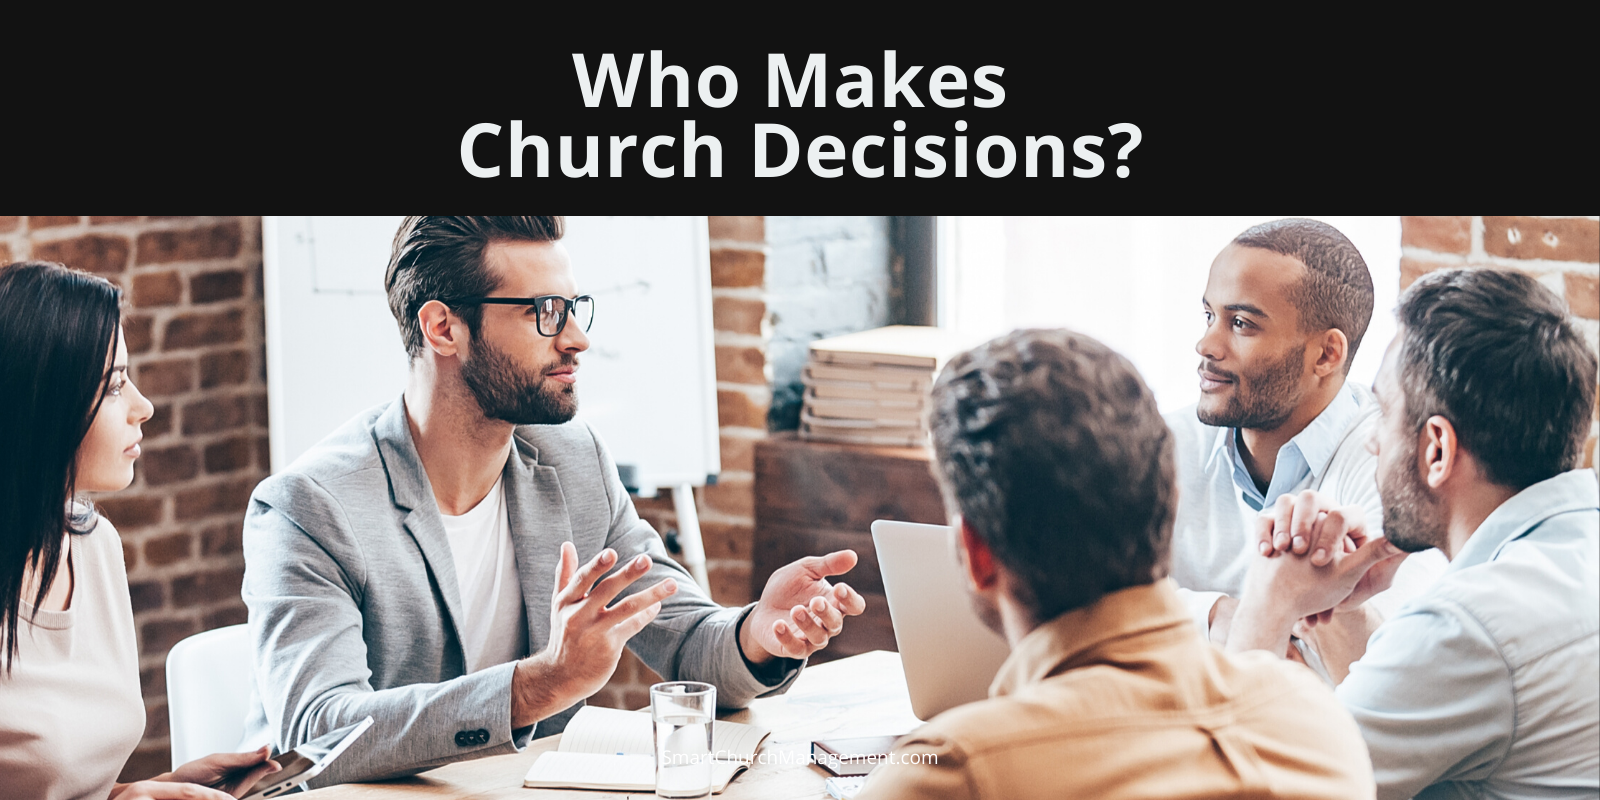 Who should make church decisions